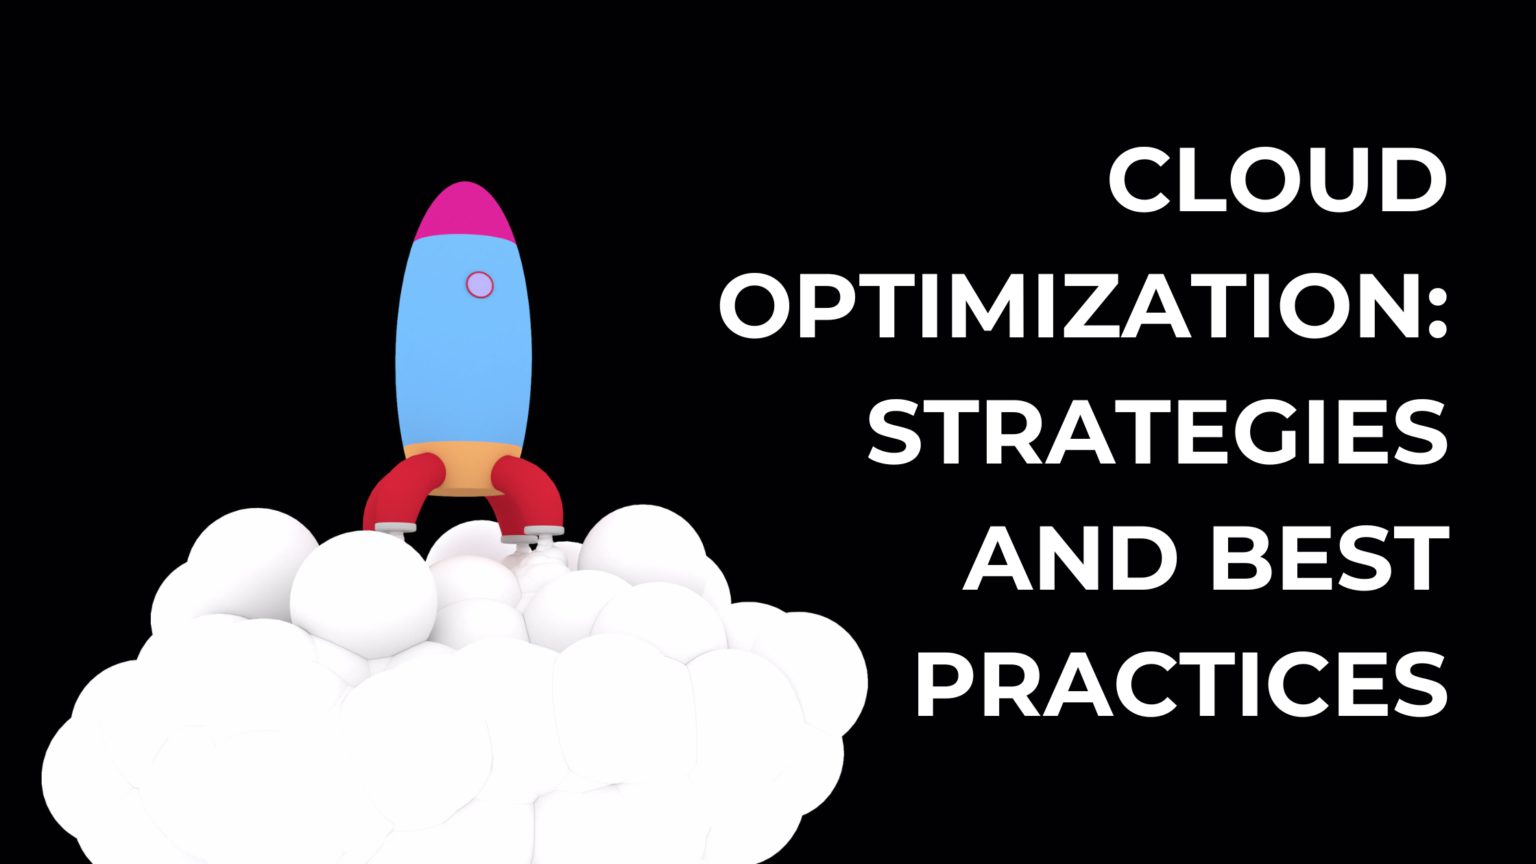 Cloud Optimization: Strategies and Best Practices